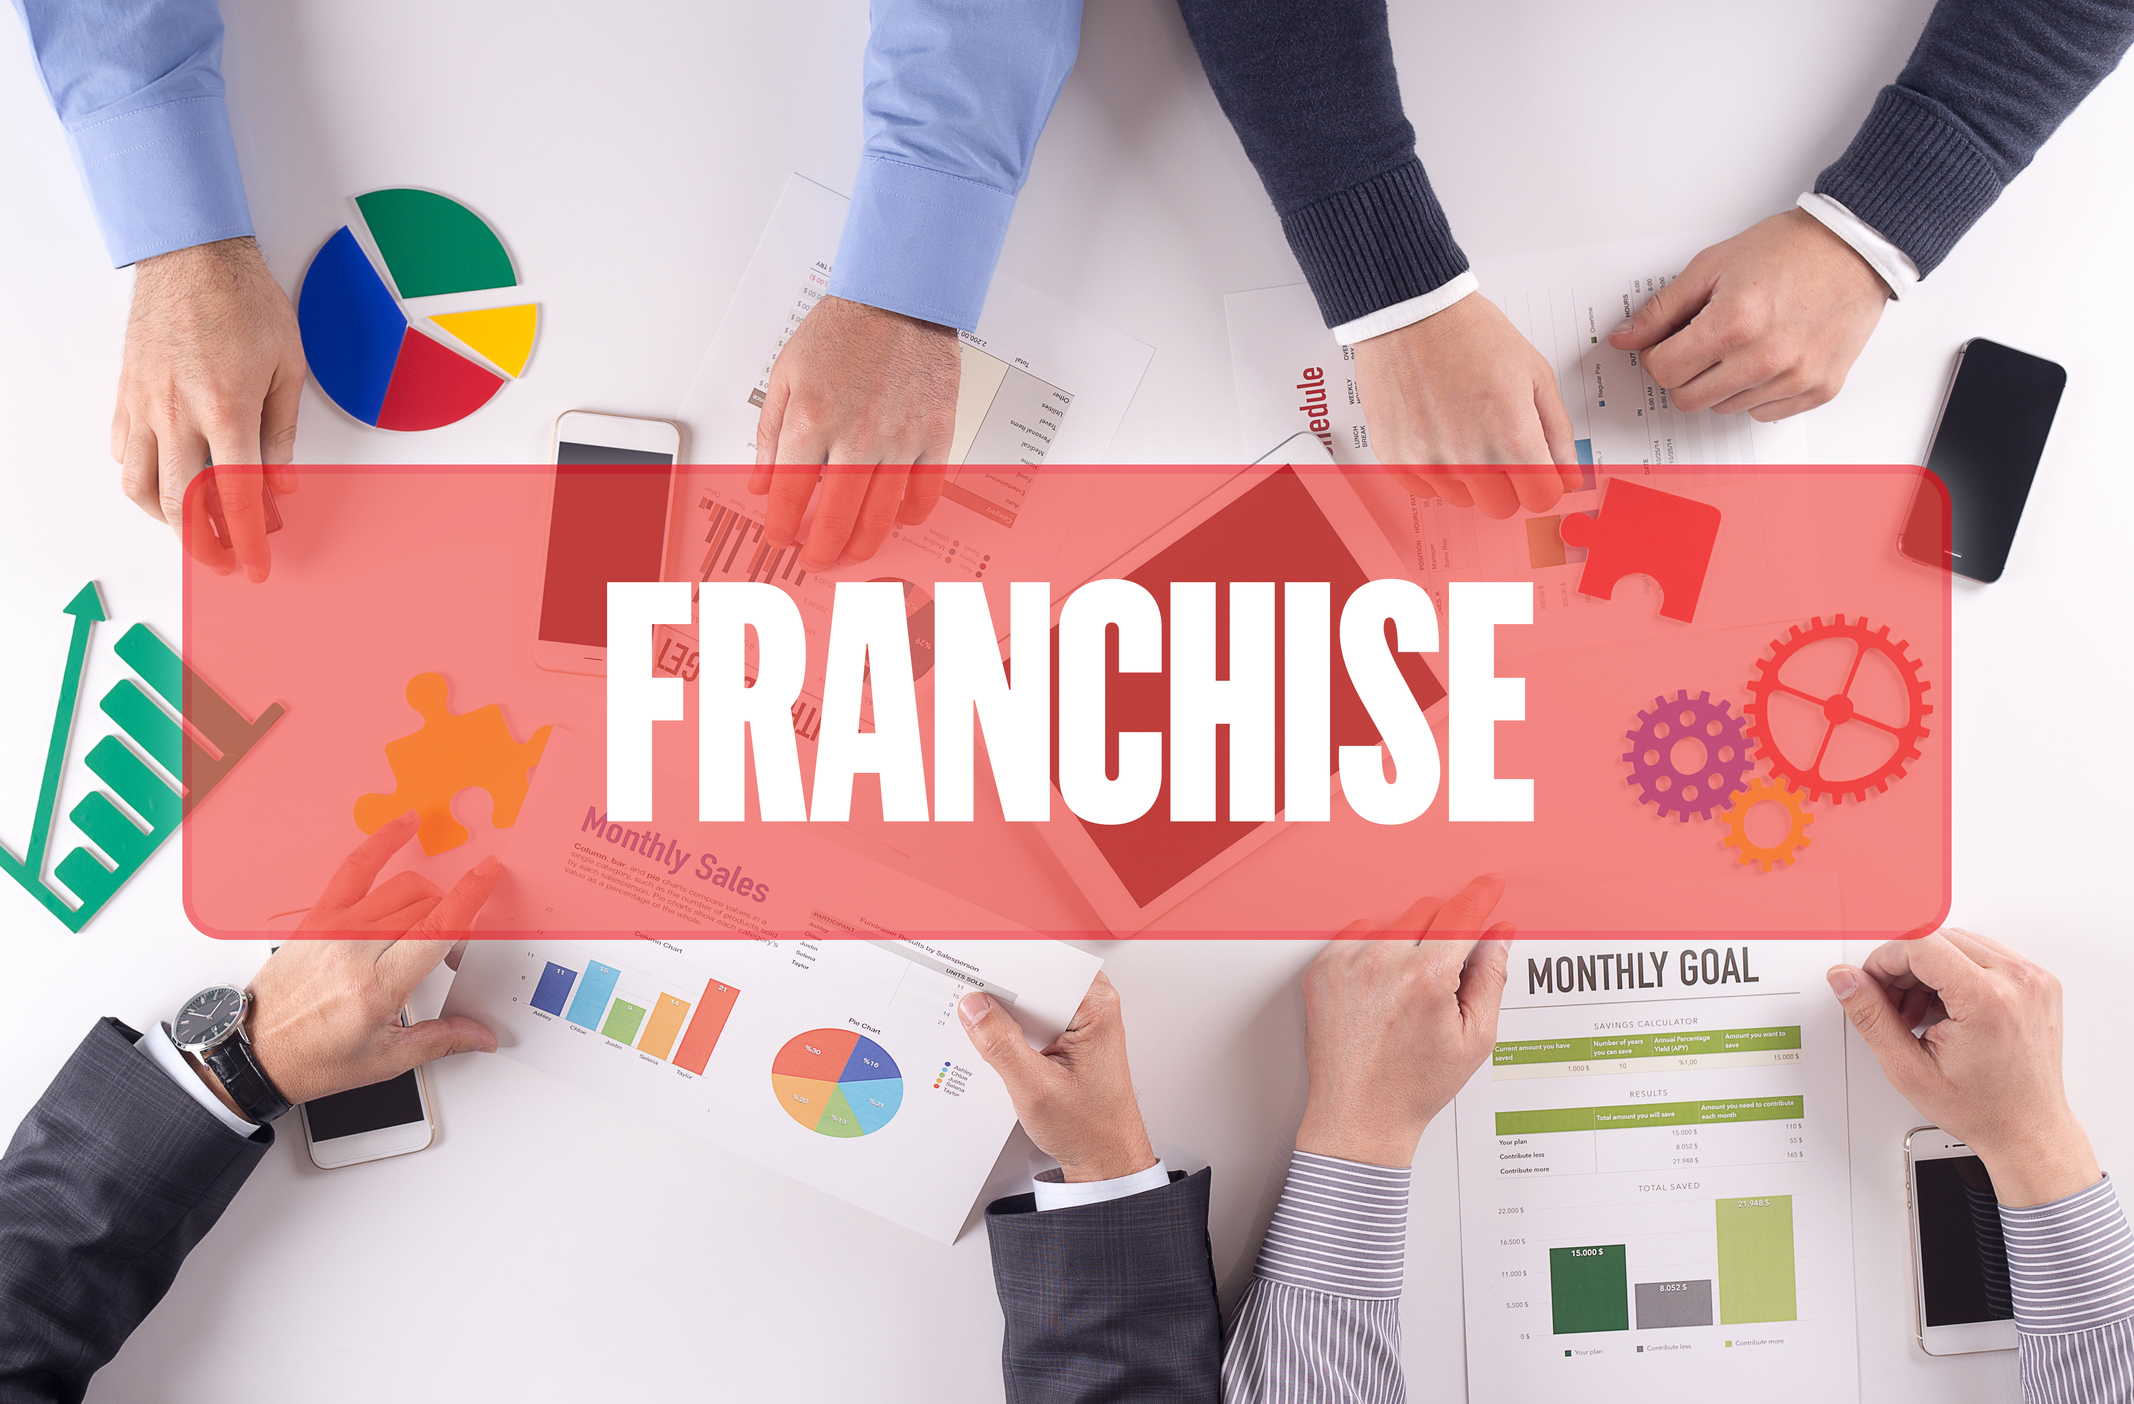 Franchise Business - Complete Controller